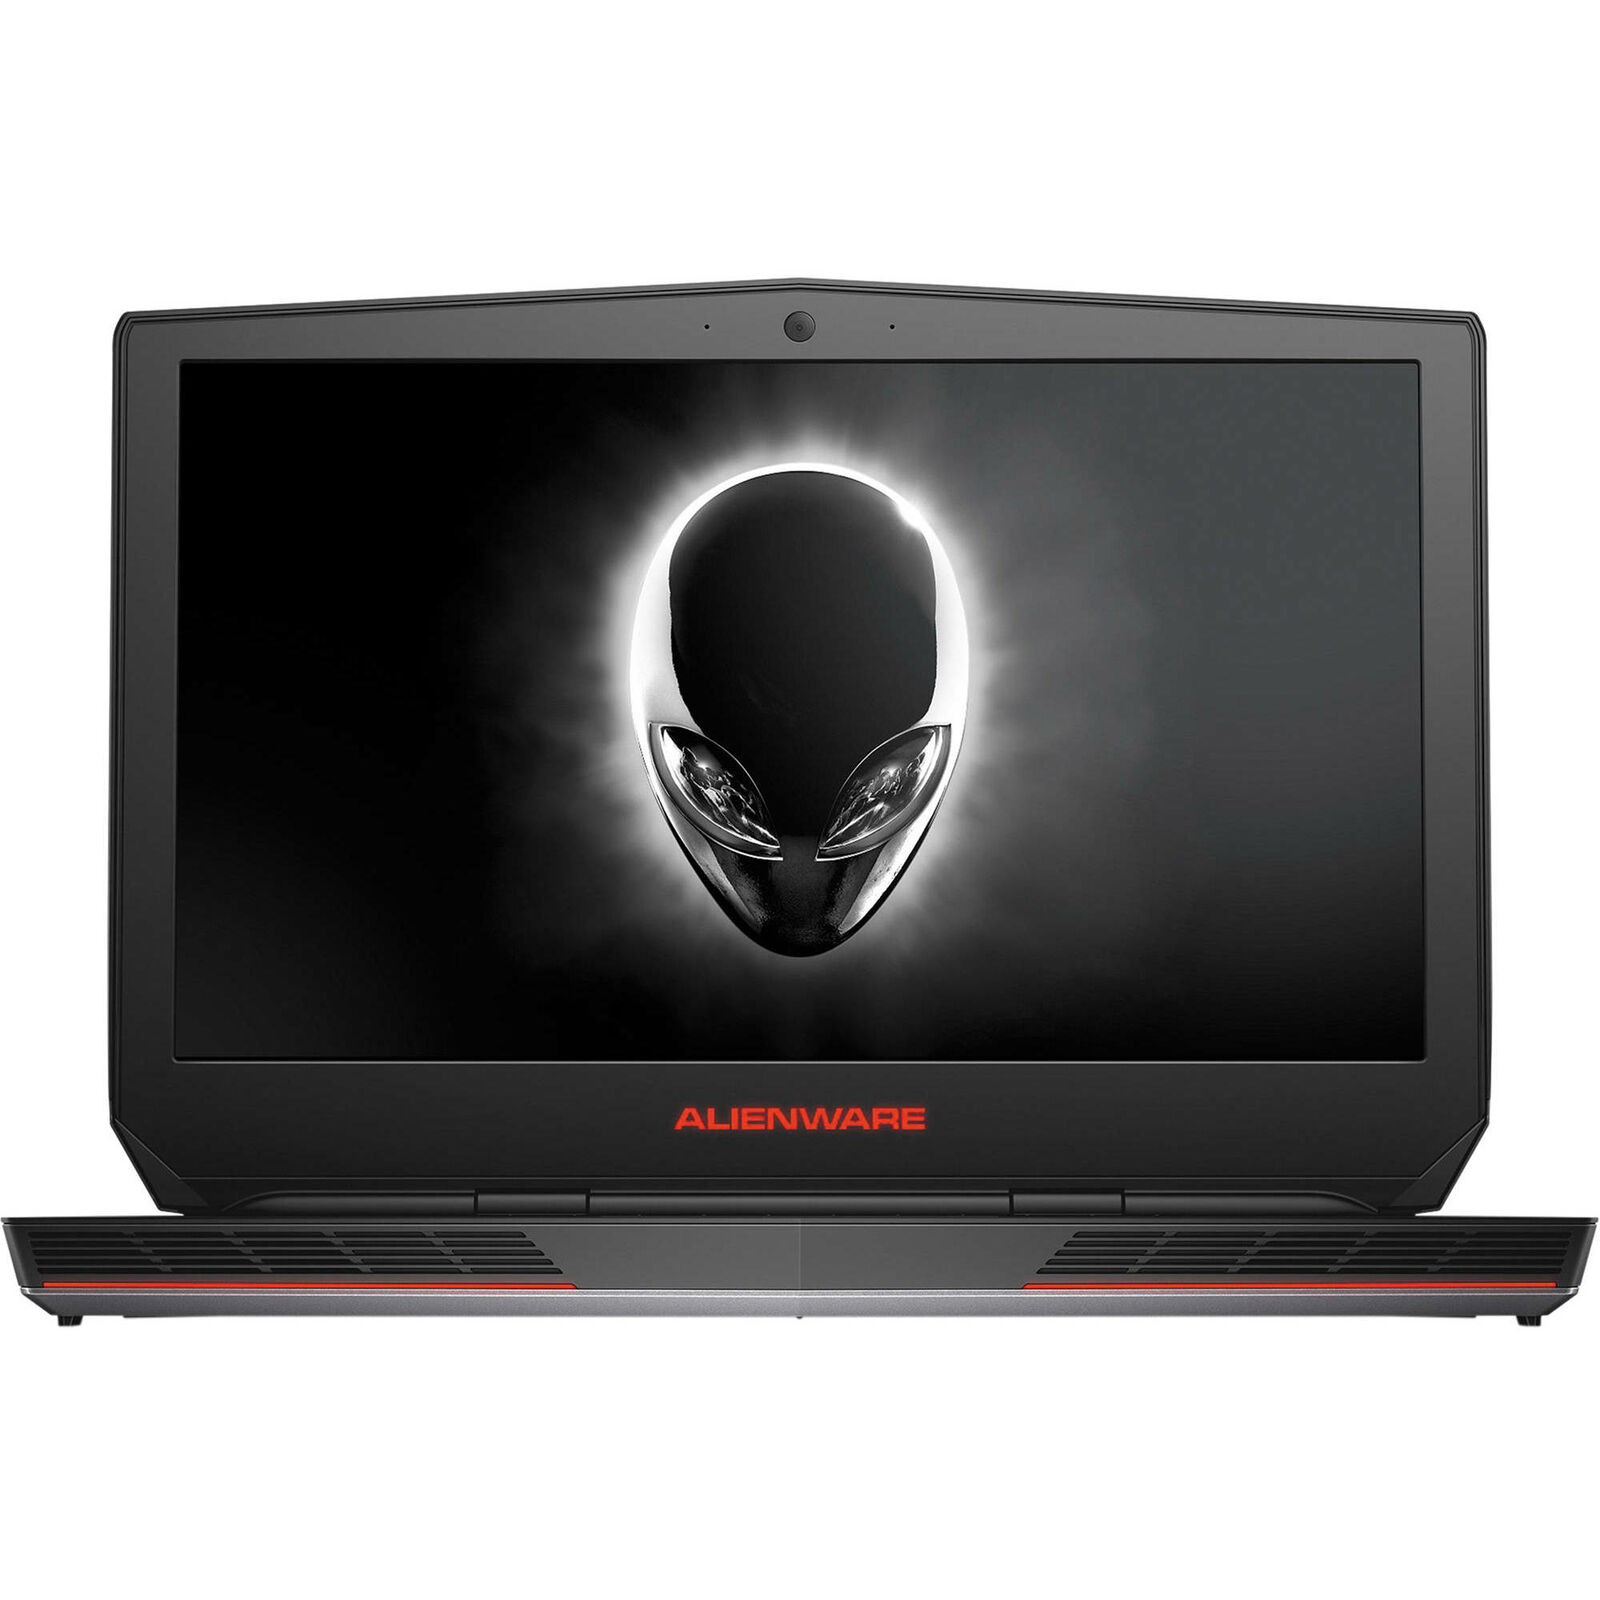 Dell Anw15-8214slv - Alienware 15 R2 Multi-touch Notebook Black I7-6700hq 2.6 G